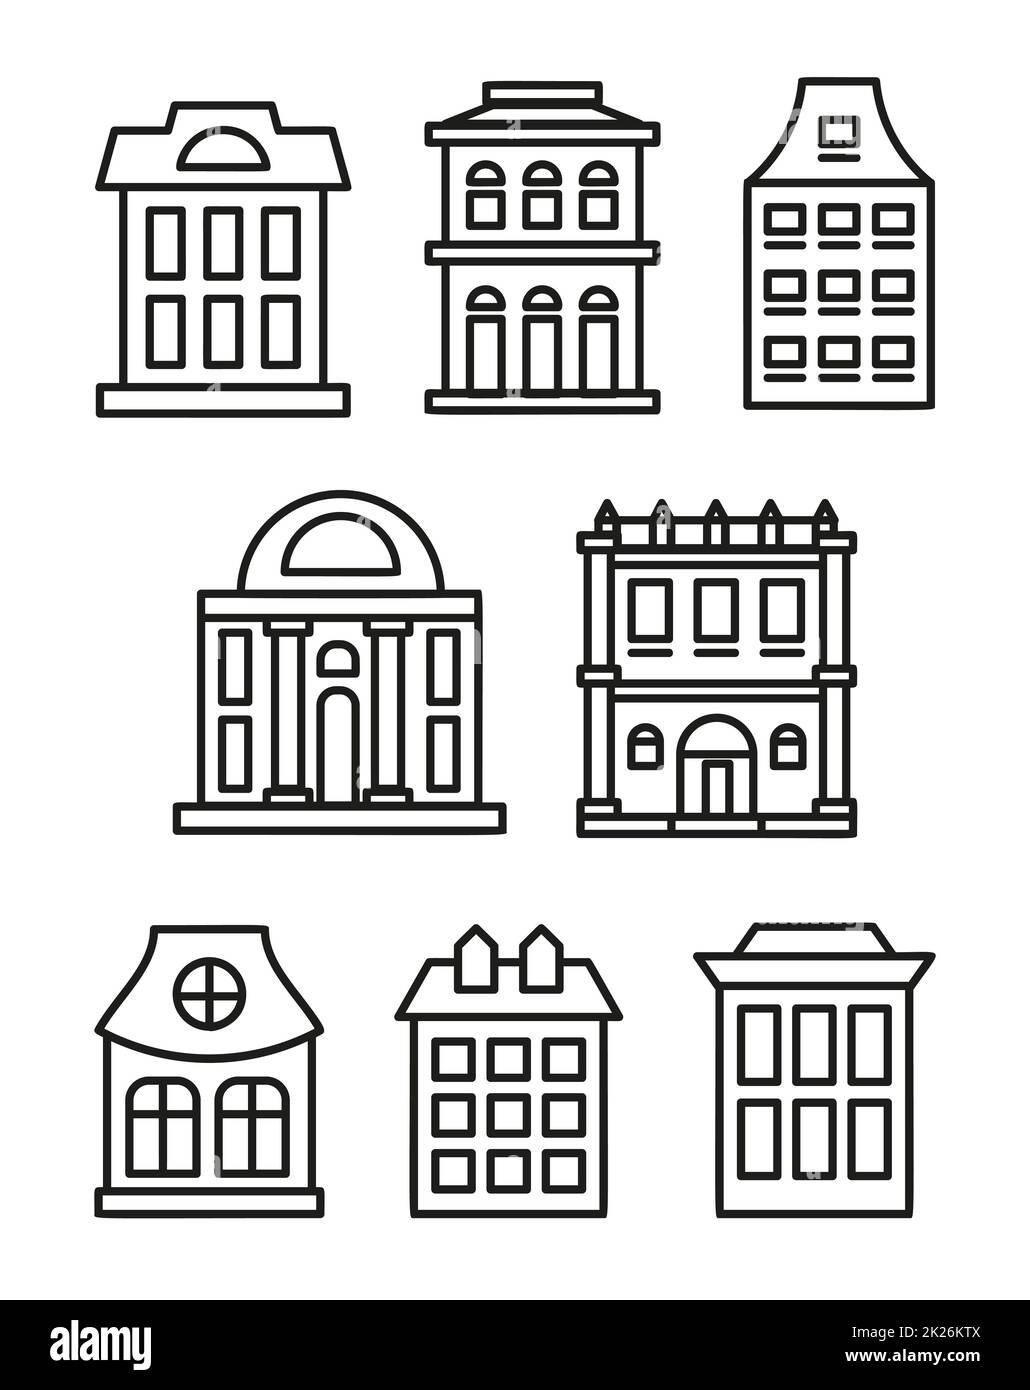 Isolated black and white color low-rise municipal houses in lineart style icons collection, elements of urban architectural buildings vector illustrations set. Stock Photo